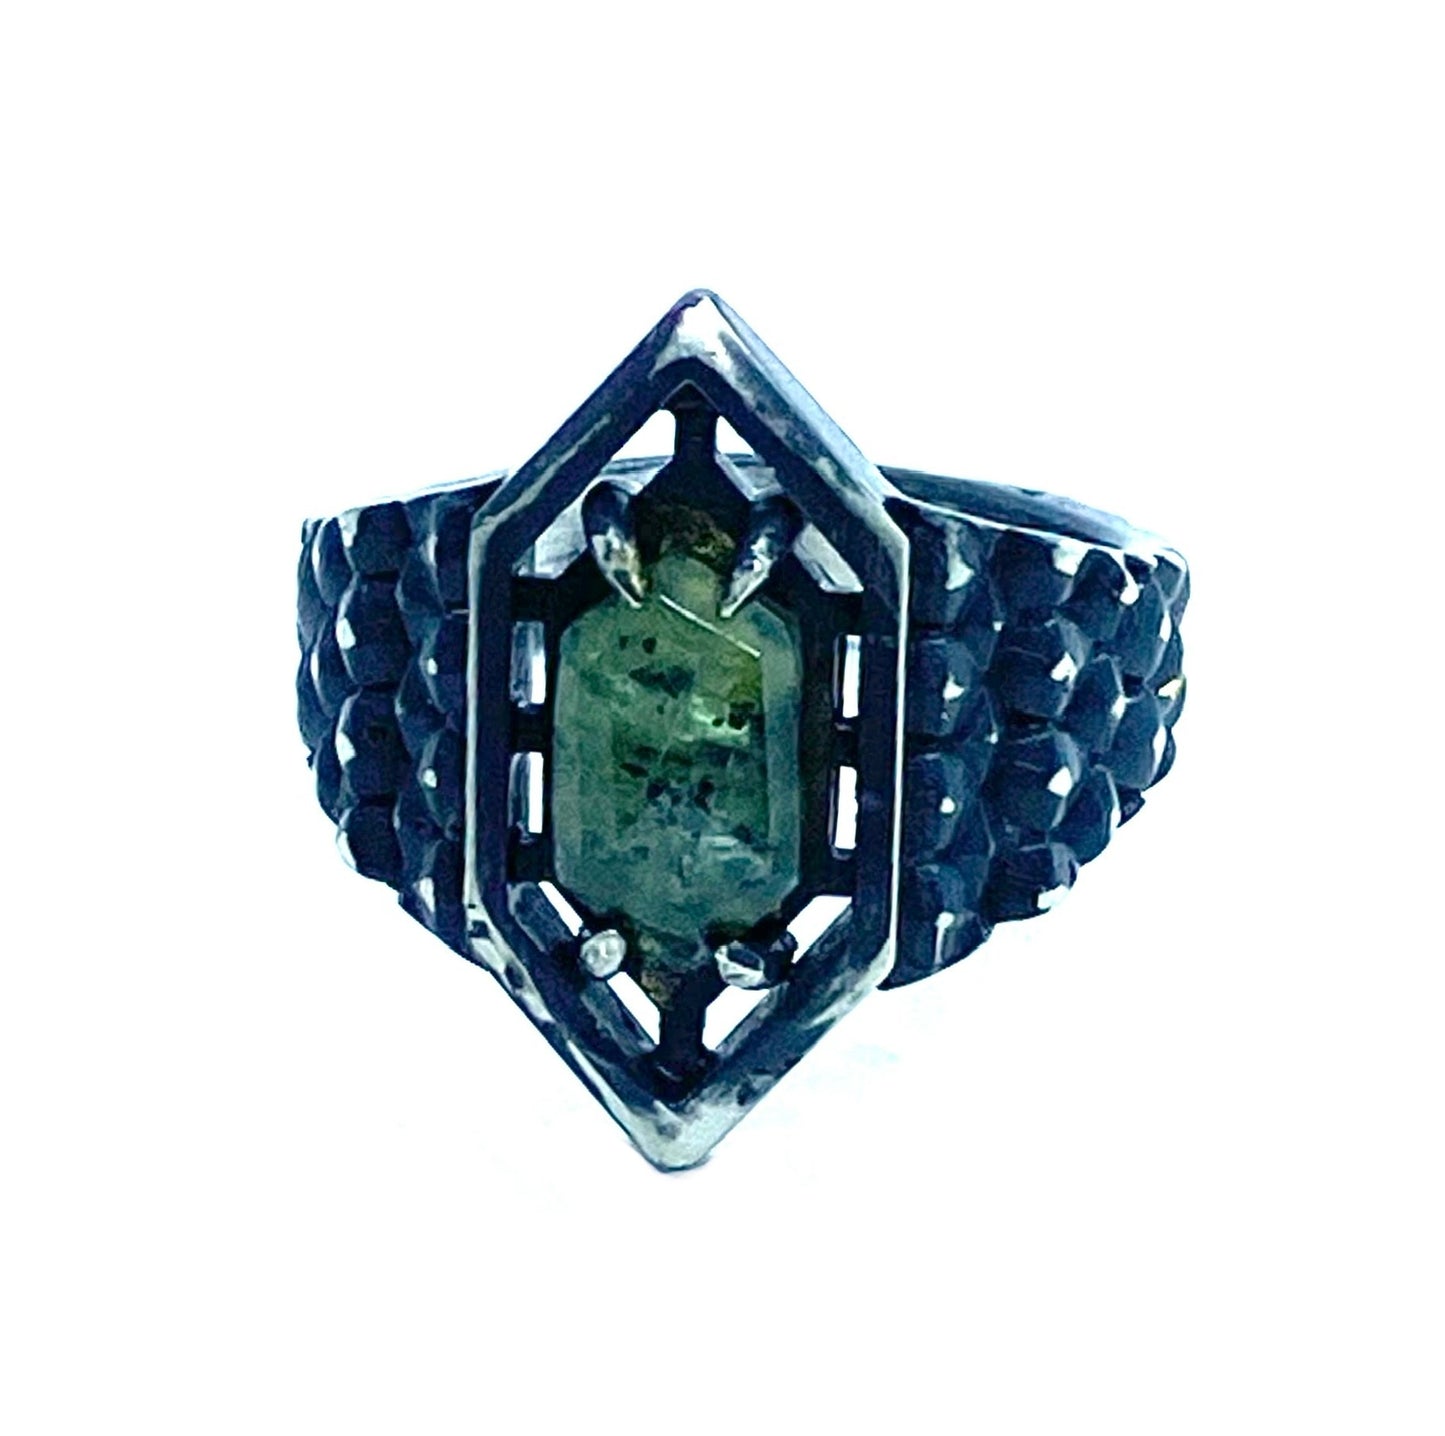 Soothsayer Ring with Moss Kyanite in Sterling Silver